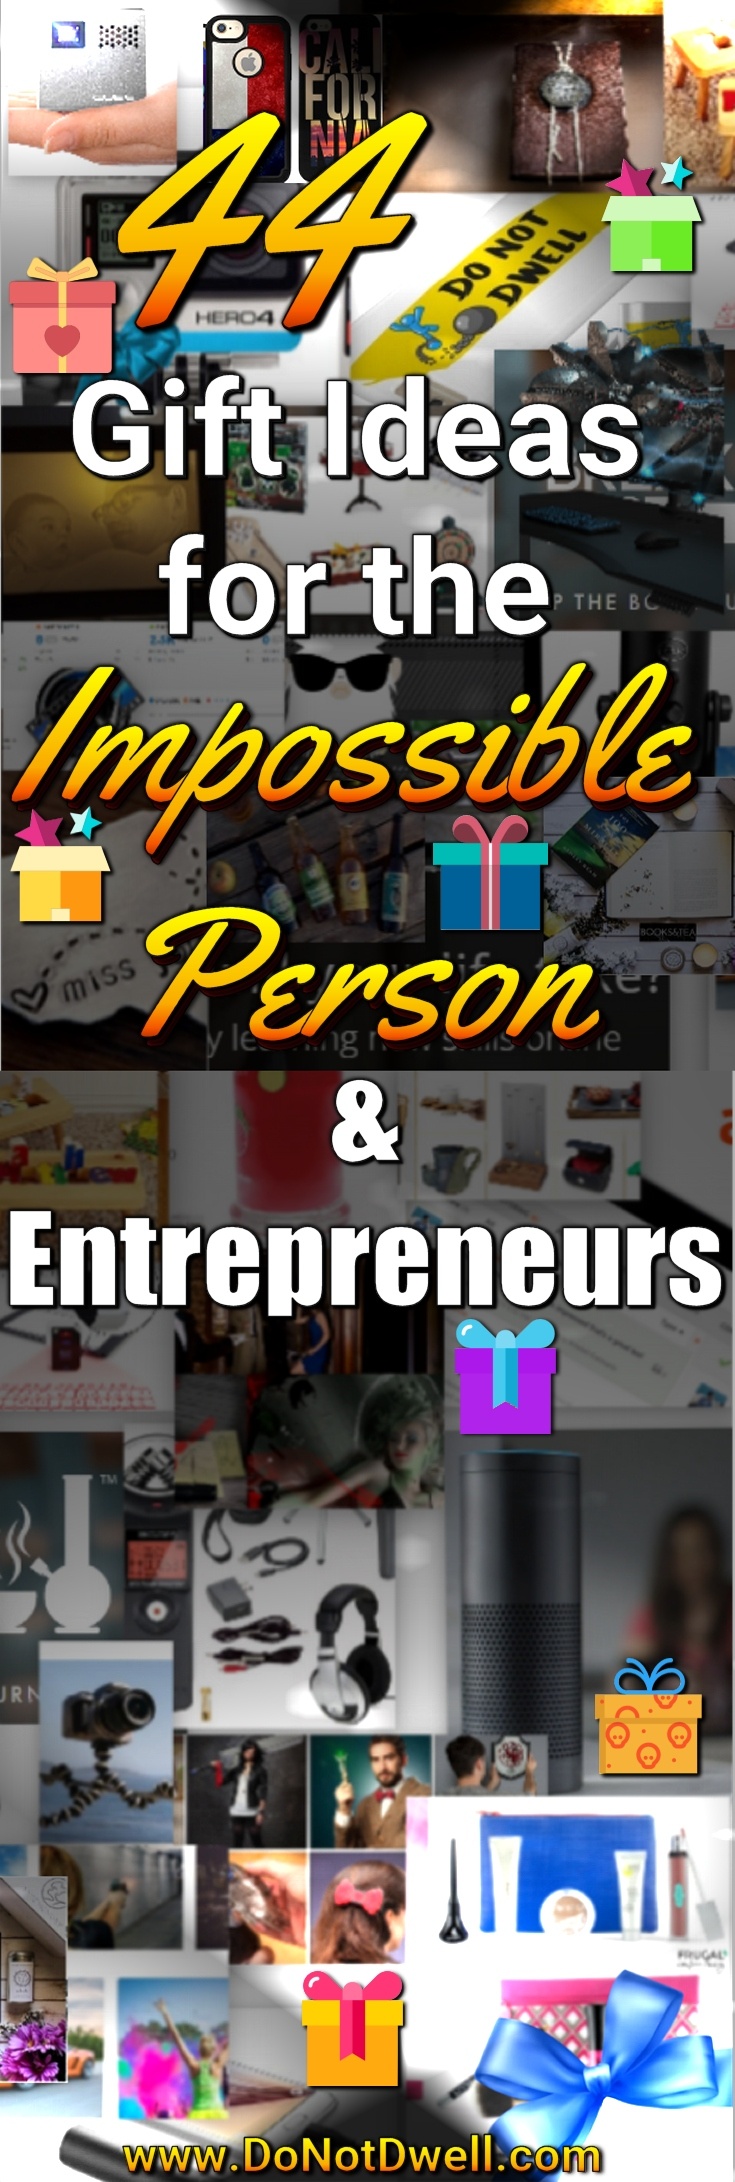 44+ Gift Ideas for the Impossible Men or Women in your Life! Also, Entrepreneurs because they just think differently and want what may seem like crazy gifts. Need to wish a co-worker Happy Birthday or tell him or her thank you? Perhaps you're looking for a cute gift your girlfriend for Christmas or a cool present for your boyfriend for Valentine's Day or an Anniversary. Do you have a best friend that is going to be moving away and need to get them a last minute long distance relationship present? Maybe you'd just like a funny gag gift that you could use to prank your Mom and Dad.